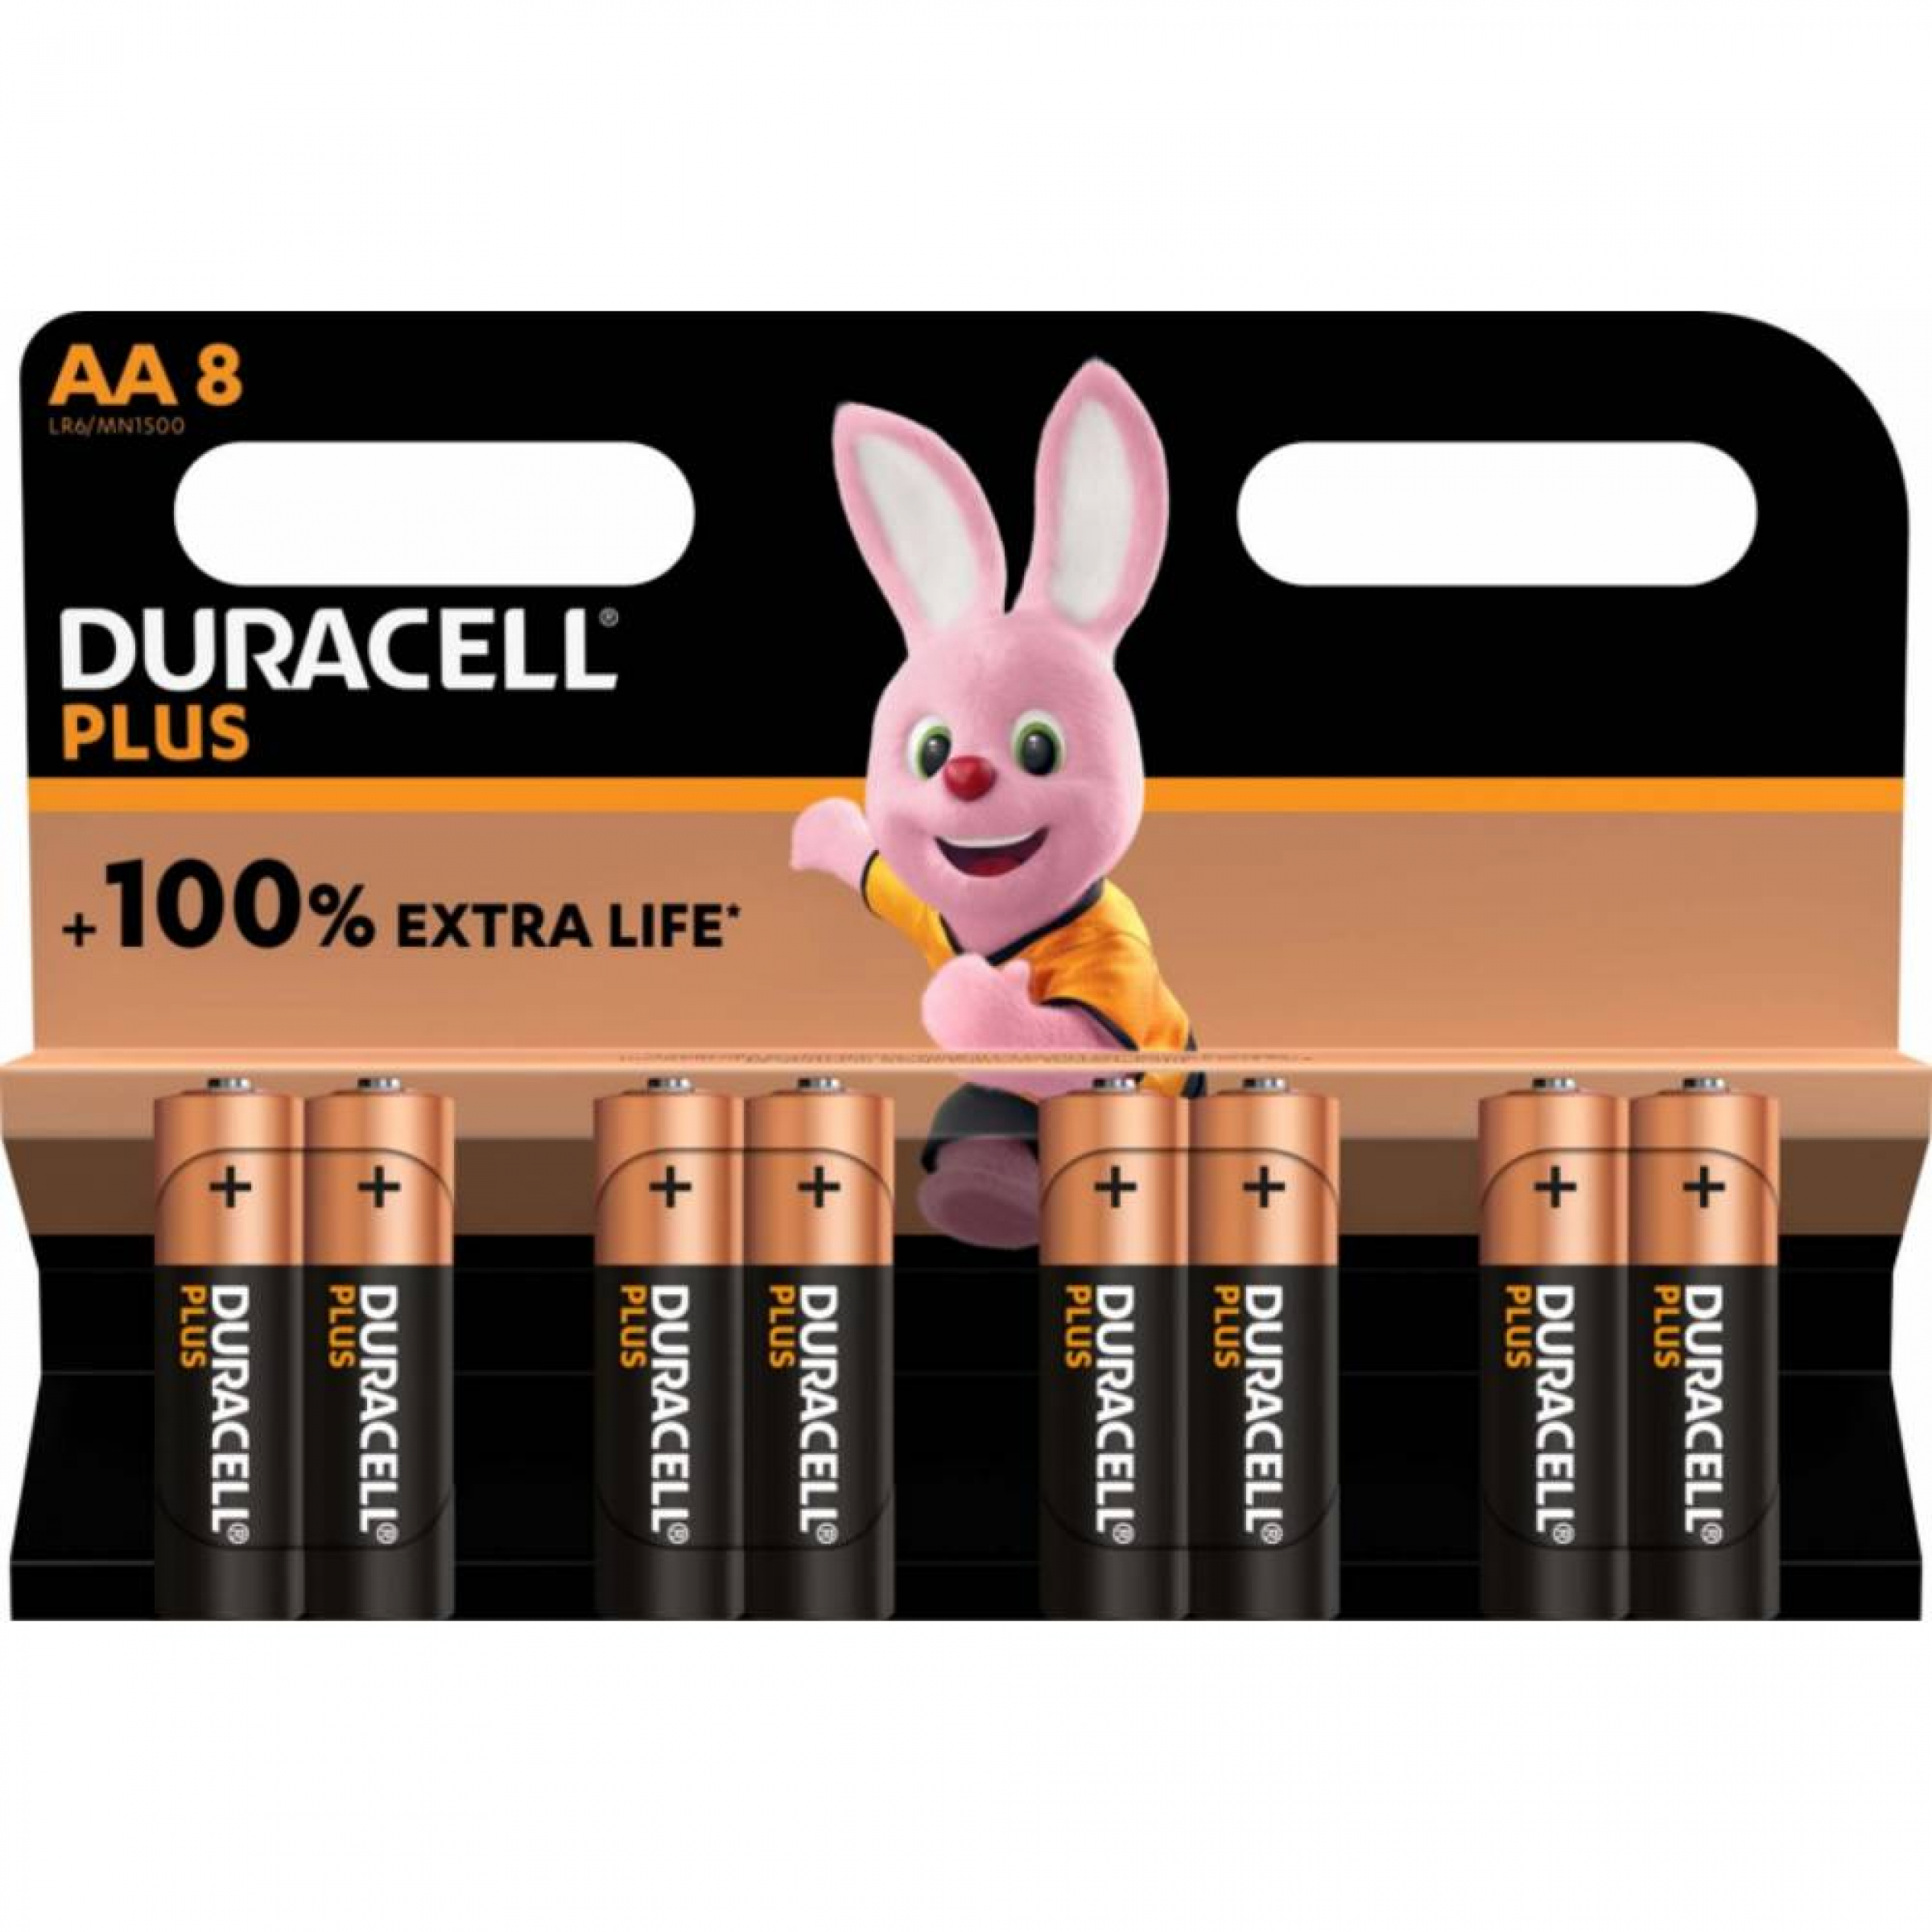 Duracell Plus LR6 AA Mignon MN1500 - Blister of 8